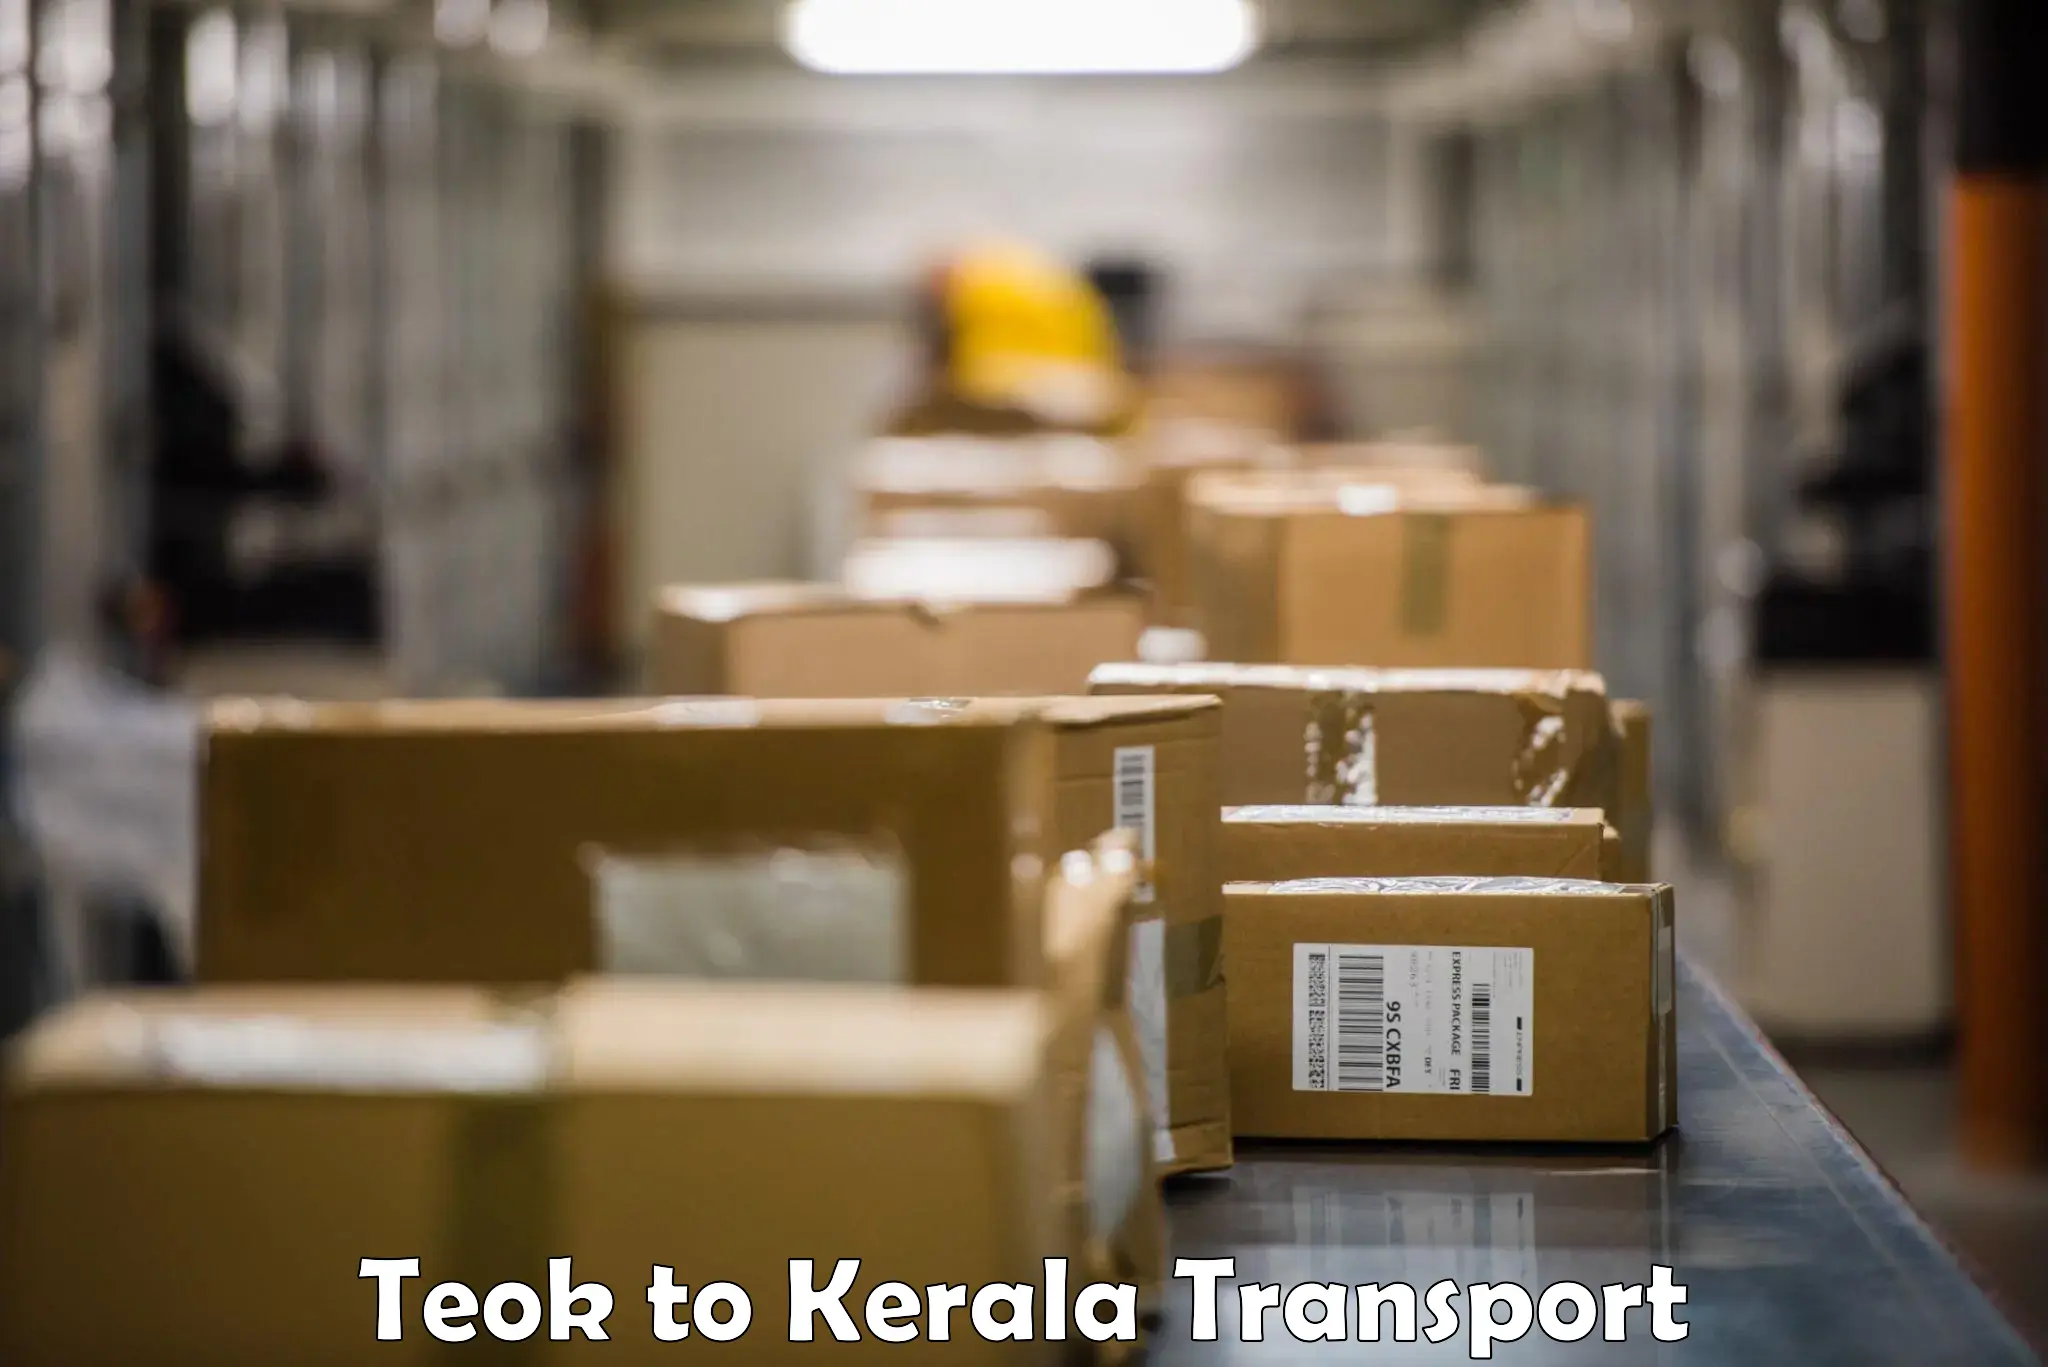 Air freight transport services Teok to Kerala